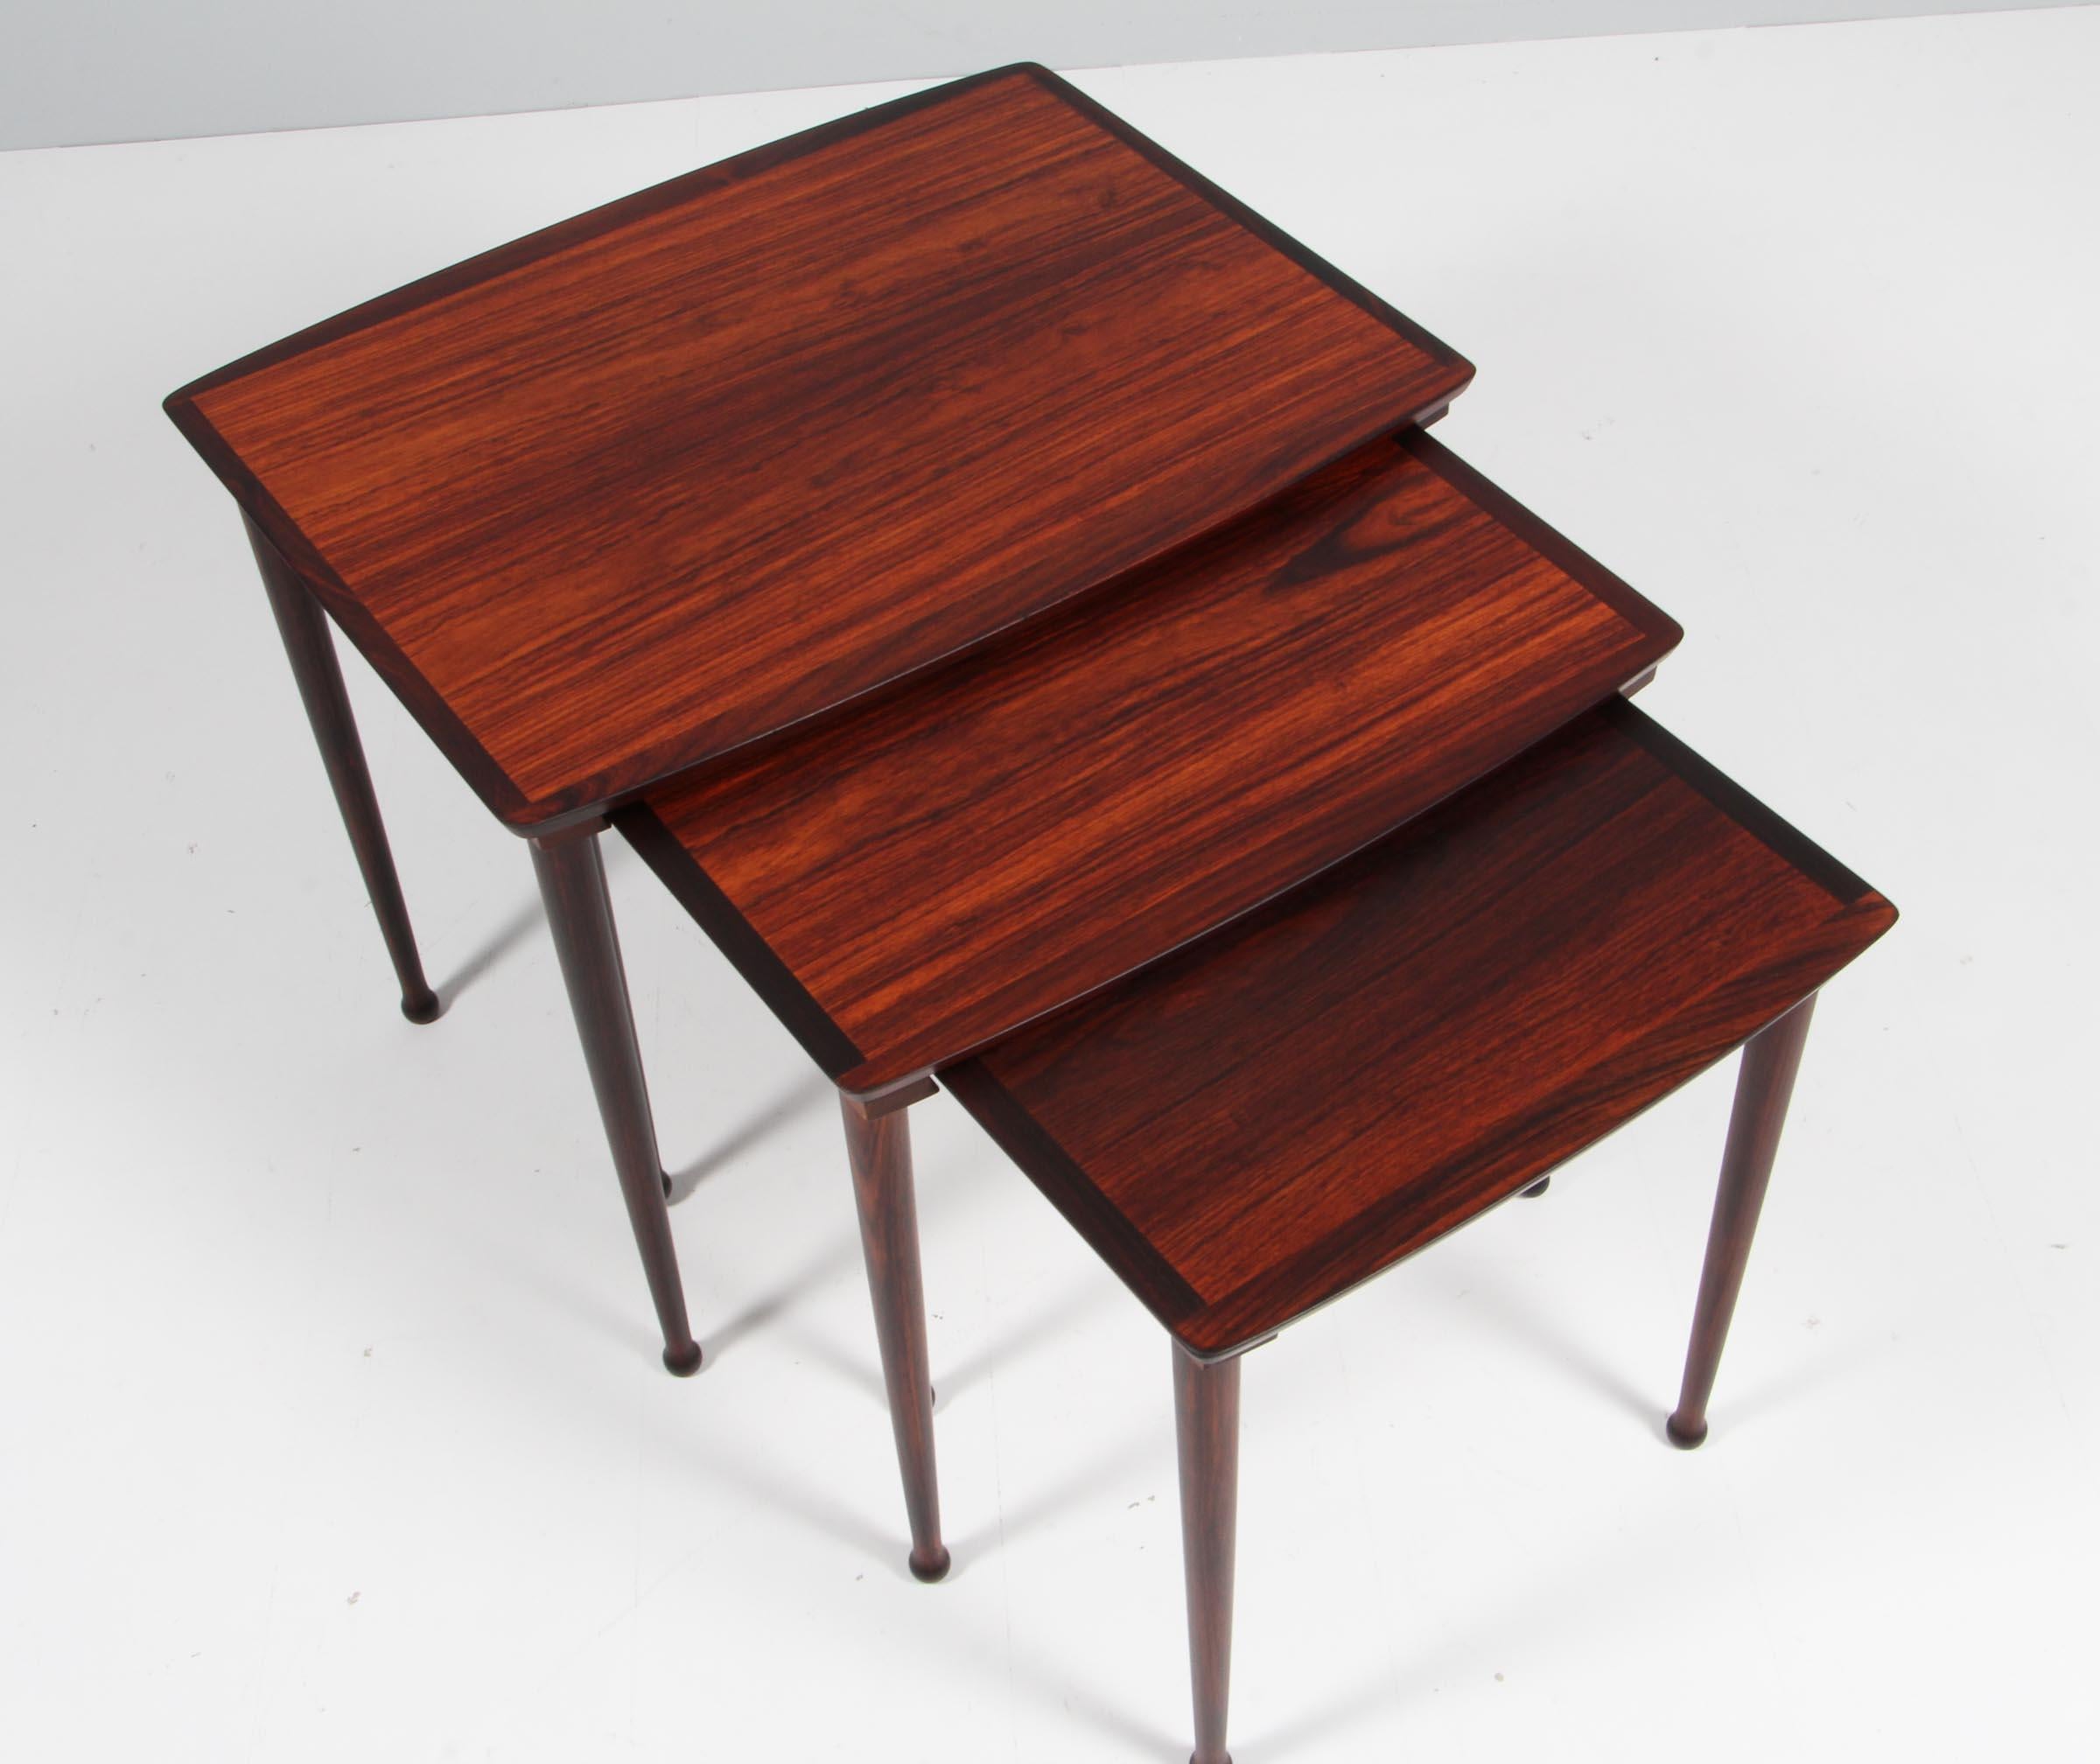 Jørgen Aakjær set of three nesting tables in rosewood, with solid rosewood drumstick legs.

Made in Denmark in the 1960s.